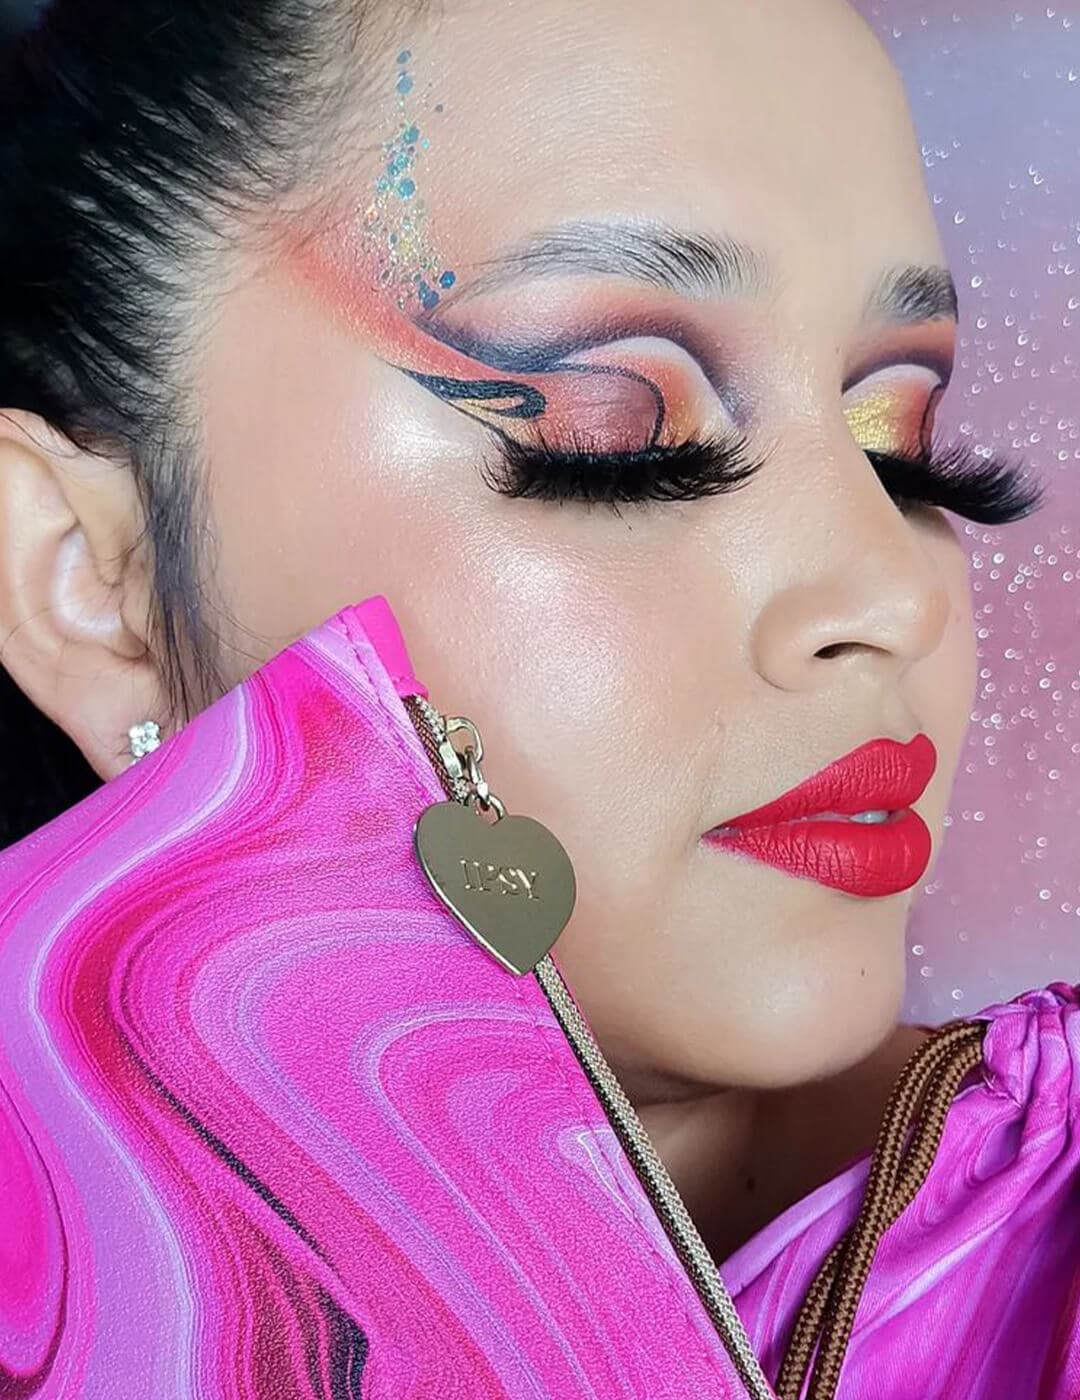 Close-up of a woman's colorful and graphic marbled eye makeup look